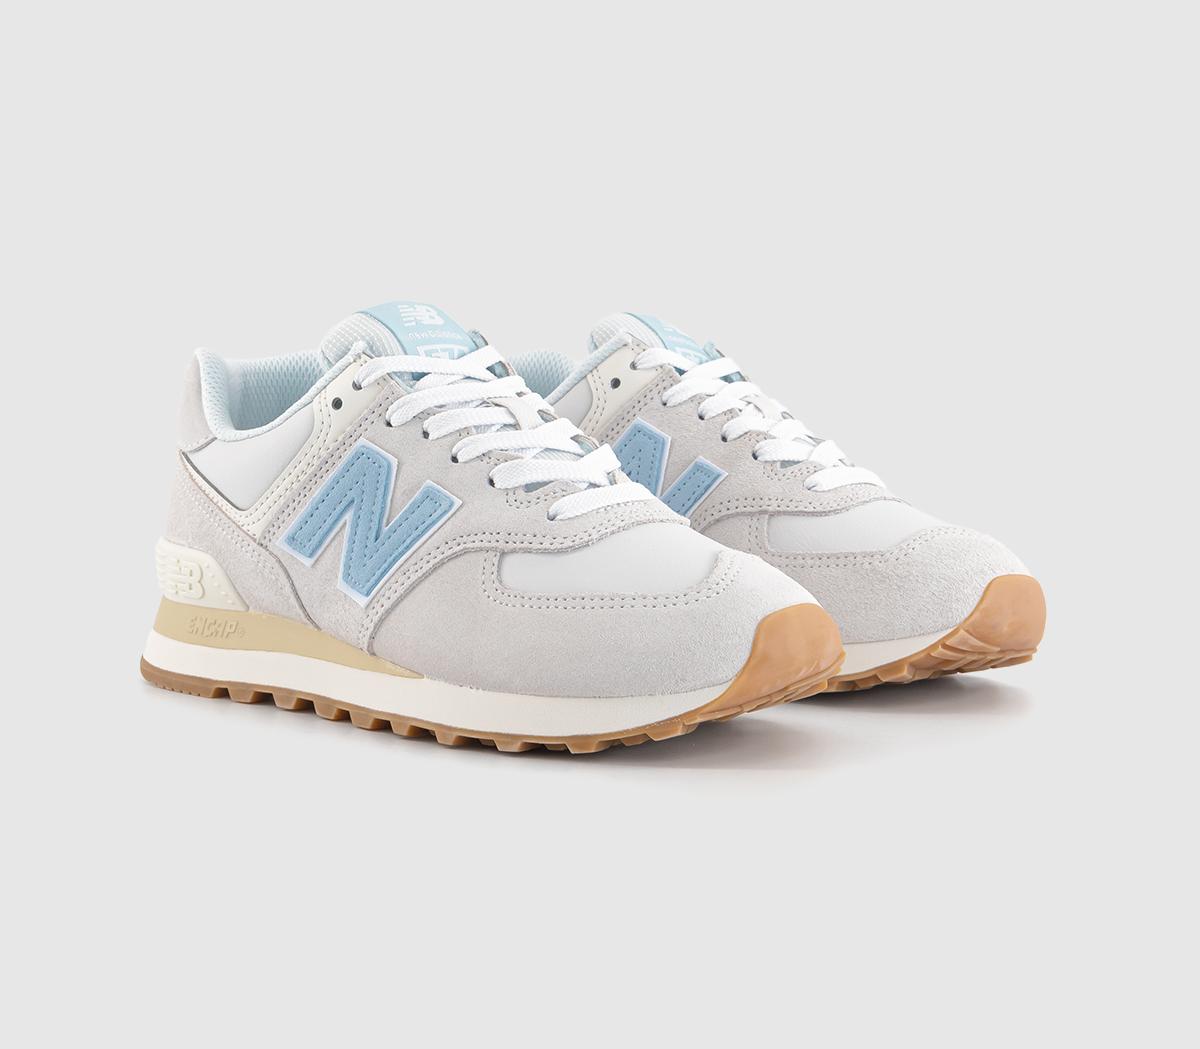 New Balance Mens 574 Trainers Reflection Natural, 6